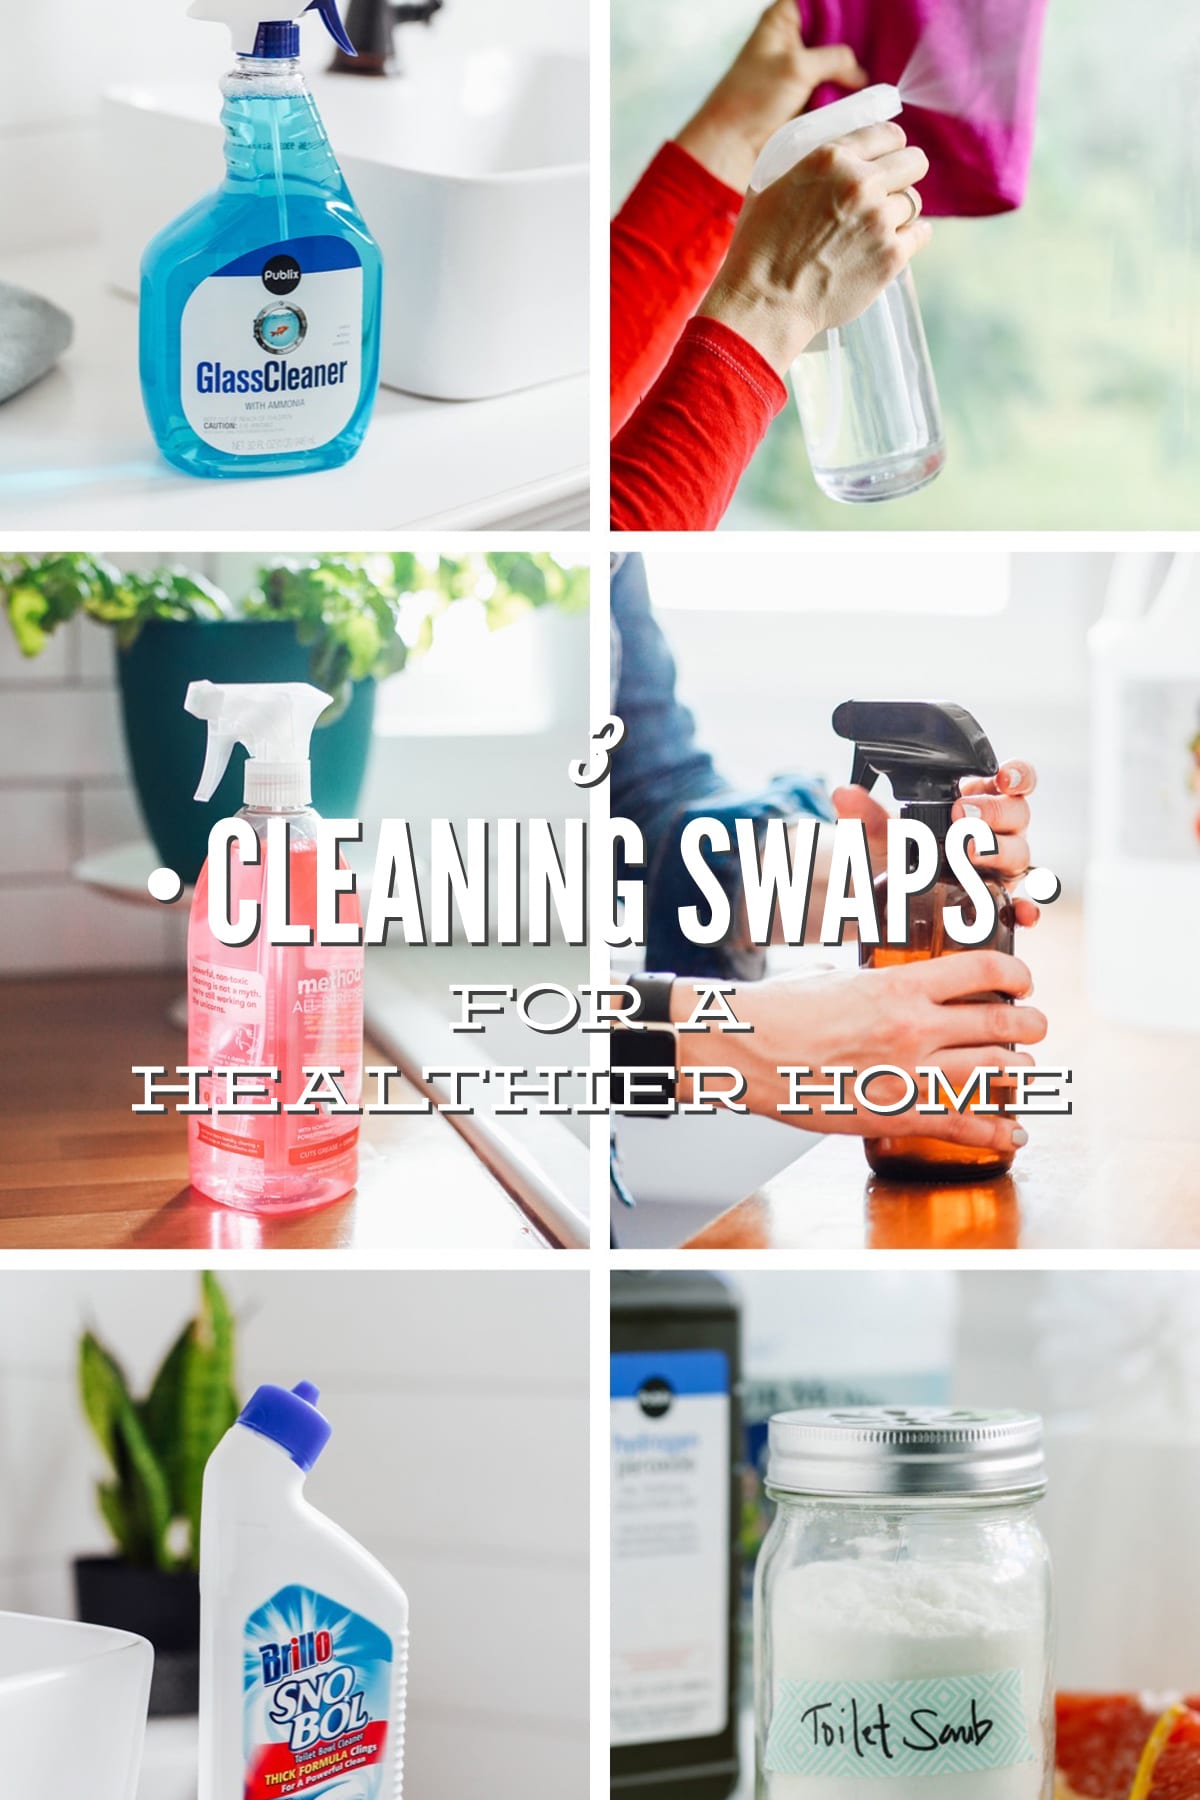 3 Cleaning Swaps for a Healthier Home